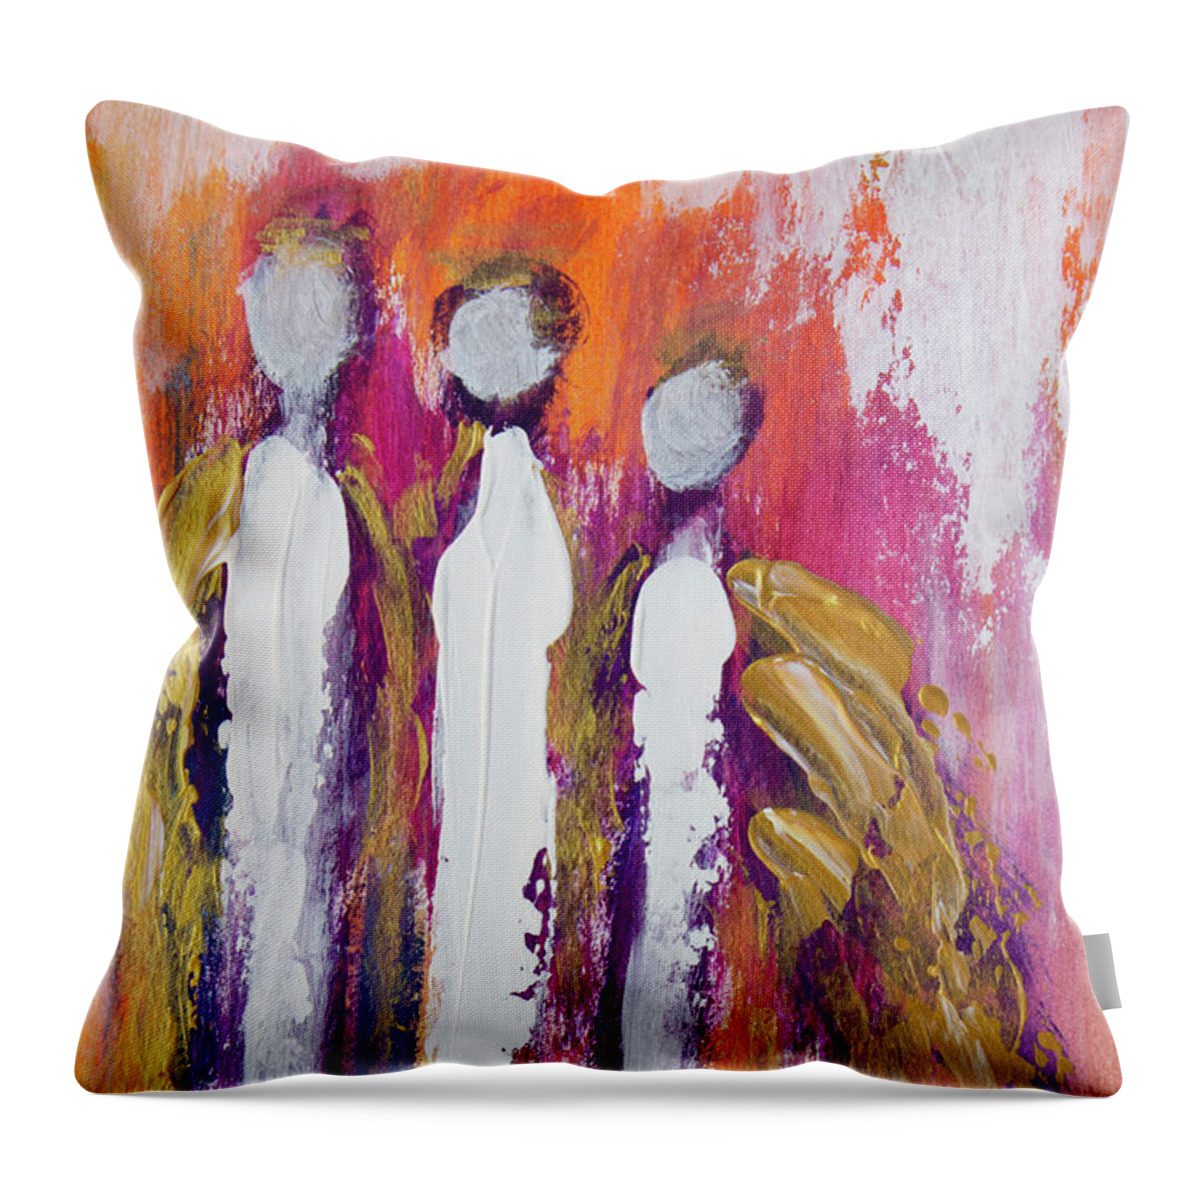 Acrylic Throw Pillow featuring the painting Angel Family by Linh Nguyen-Ng